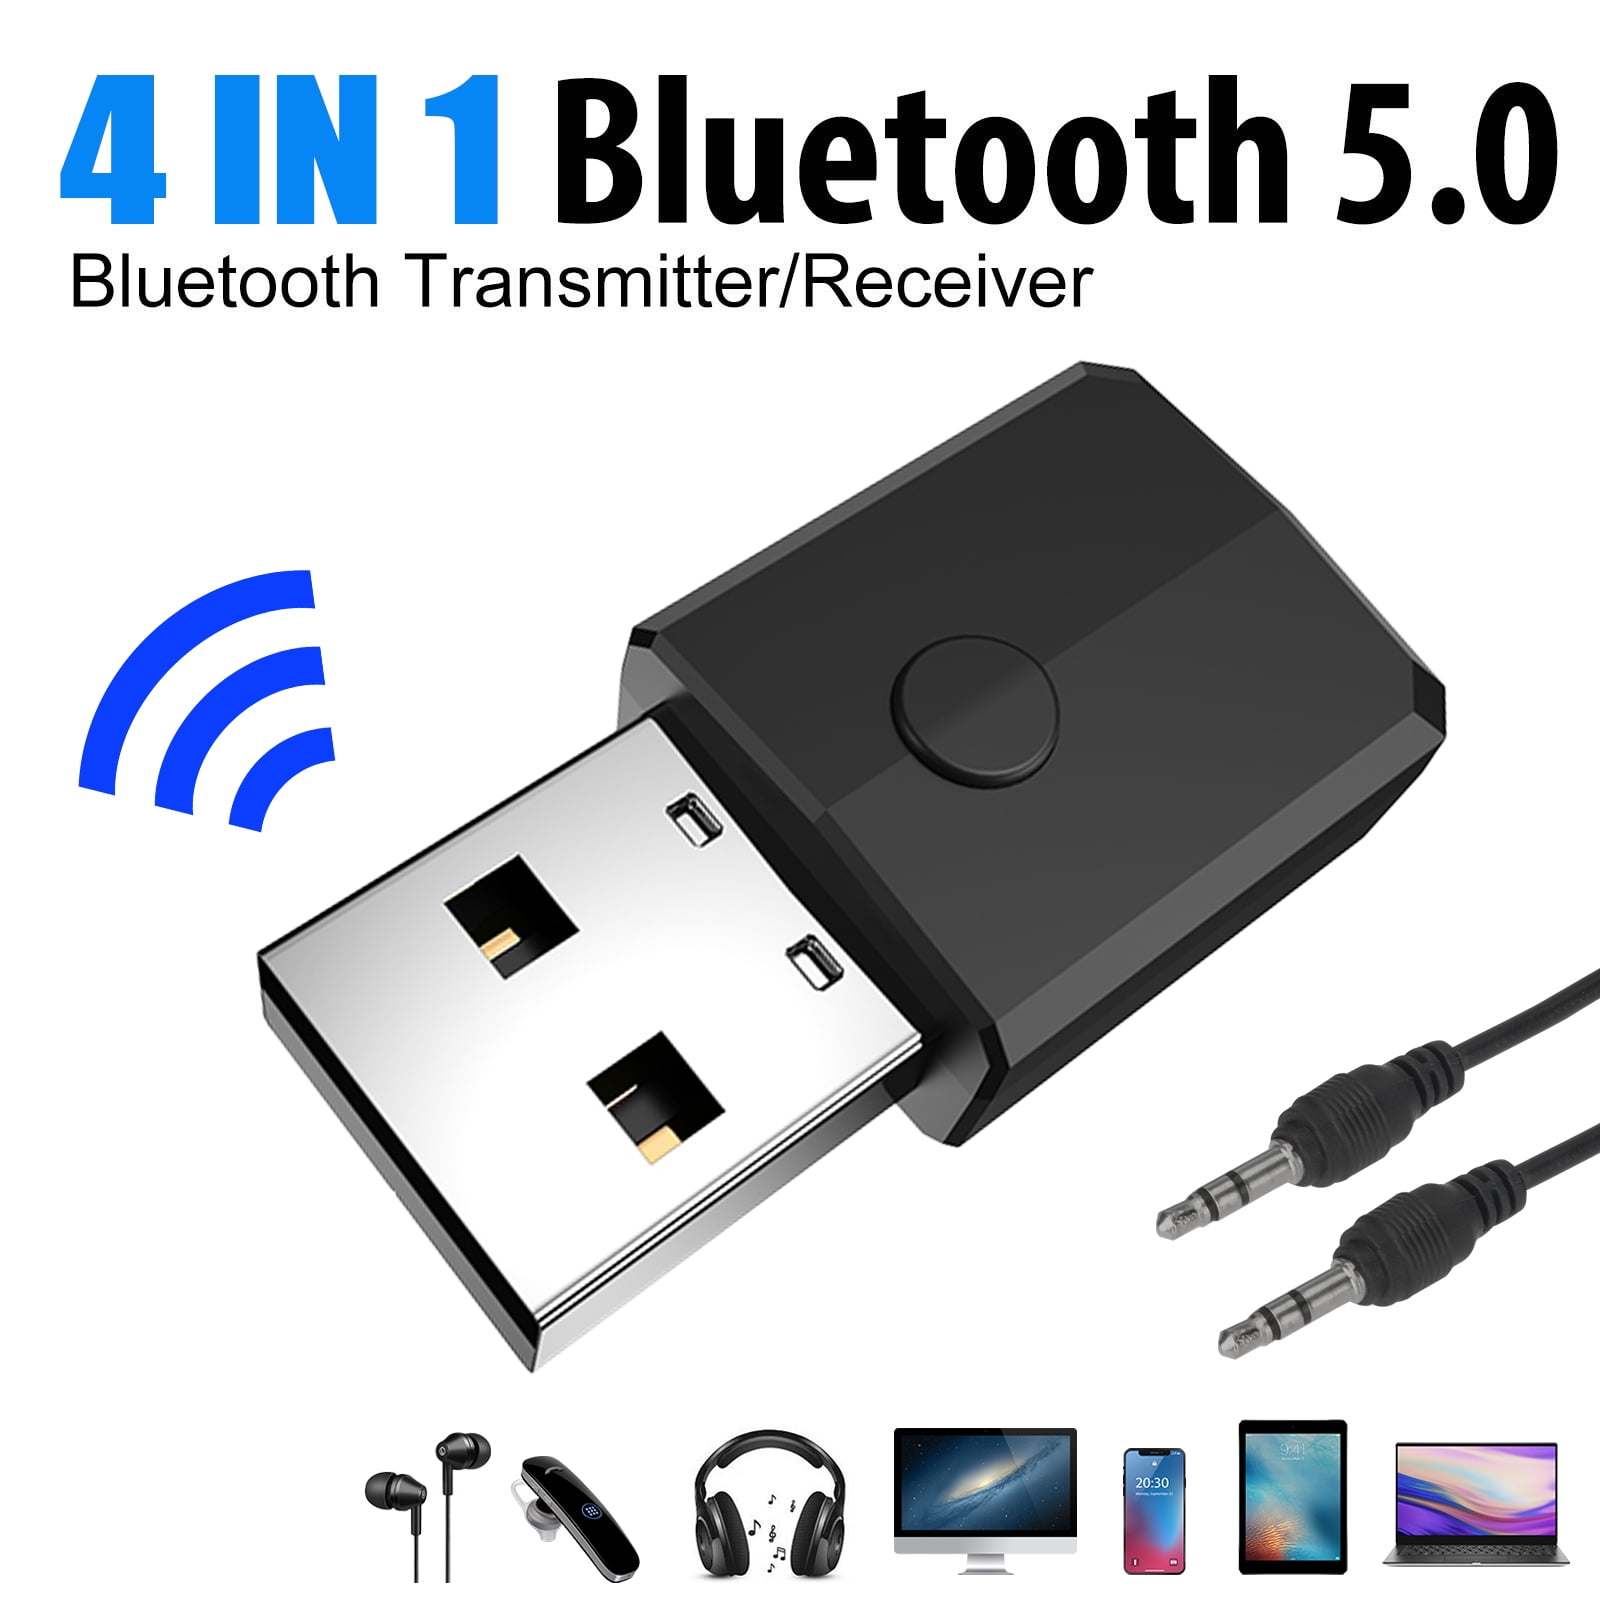 USB Bluetooth 5.0 Transmitter & Receiver Wireless Audio Music Stereo Adapter New 